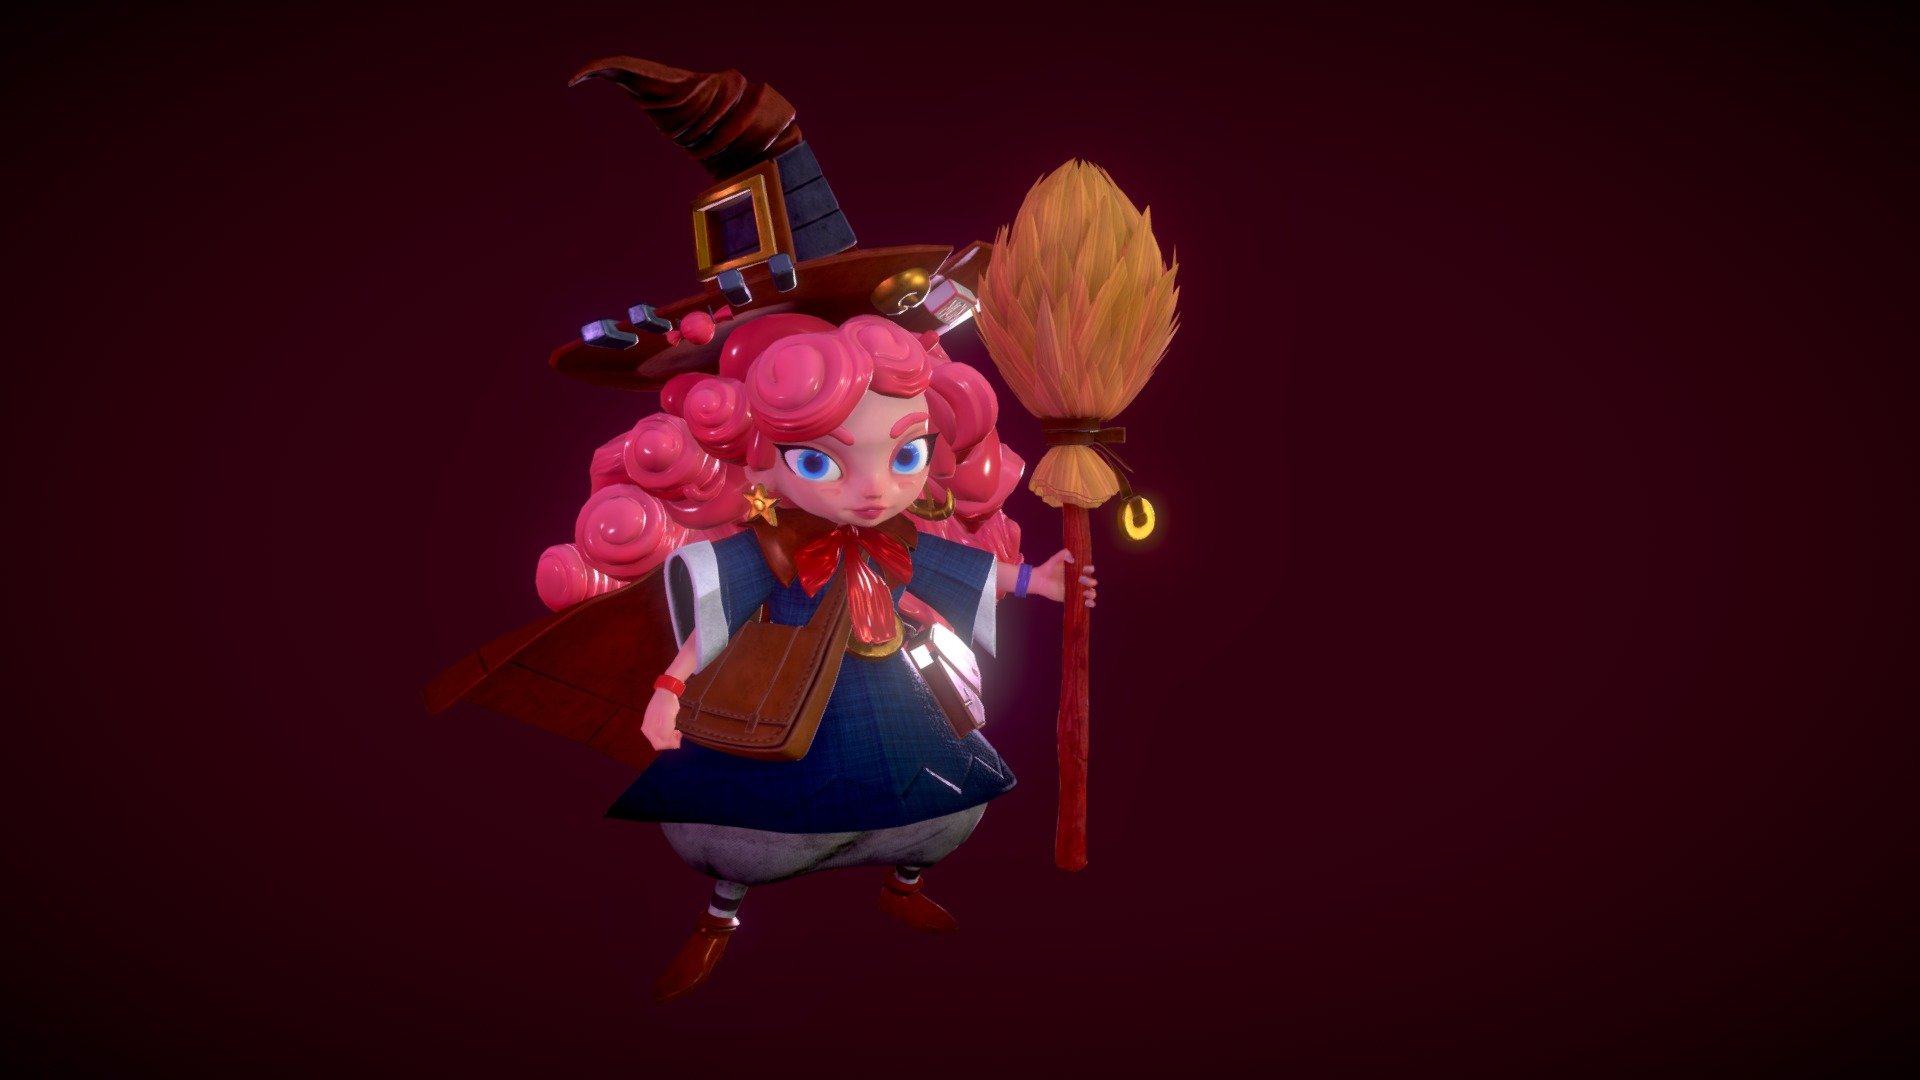 &ldquo;I present to you The Candy Witch, A really sweet little girl with dangerous power